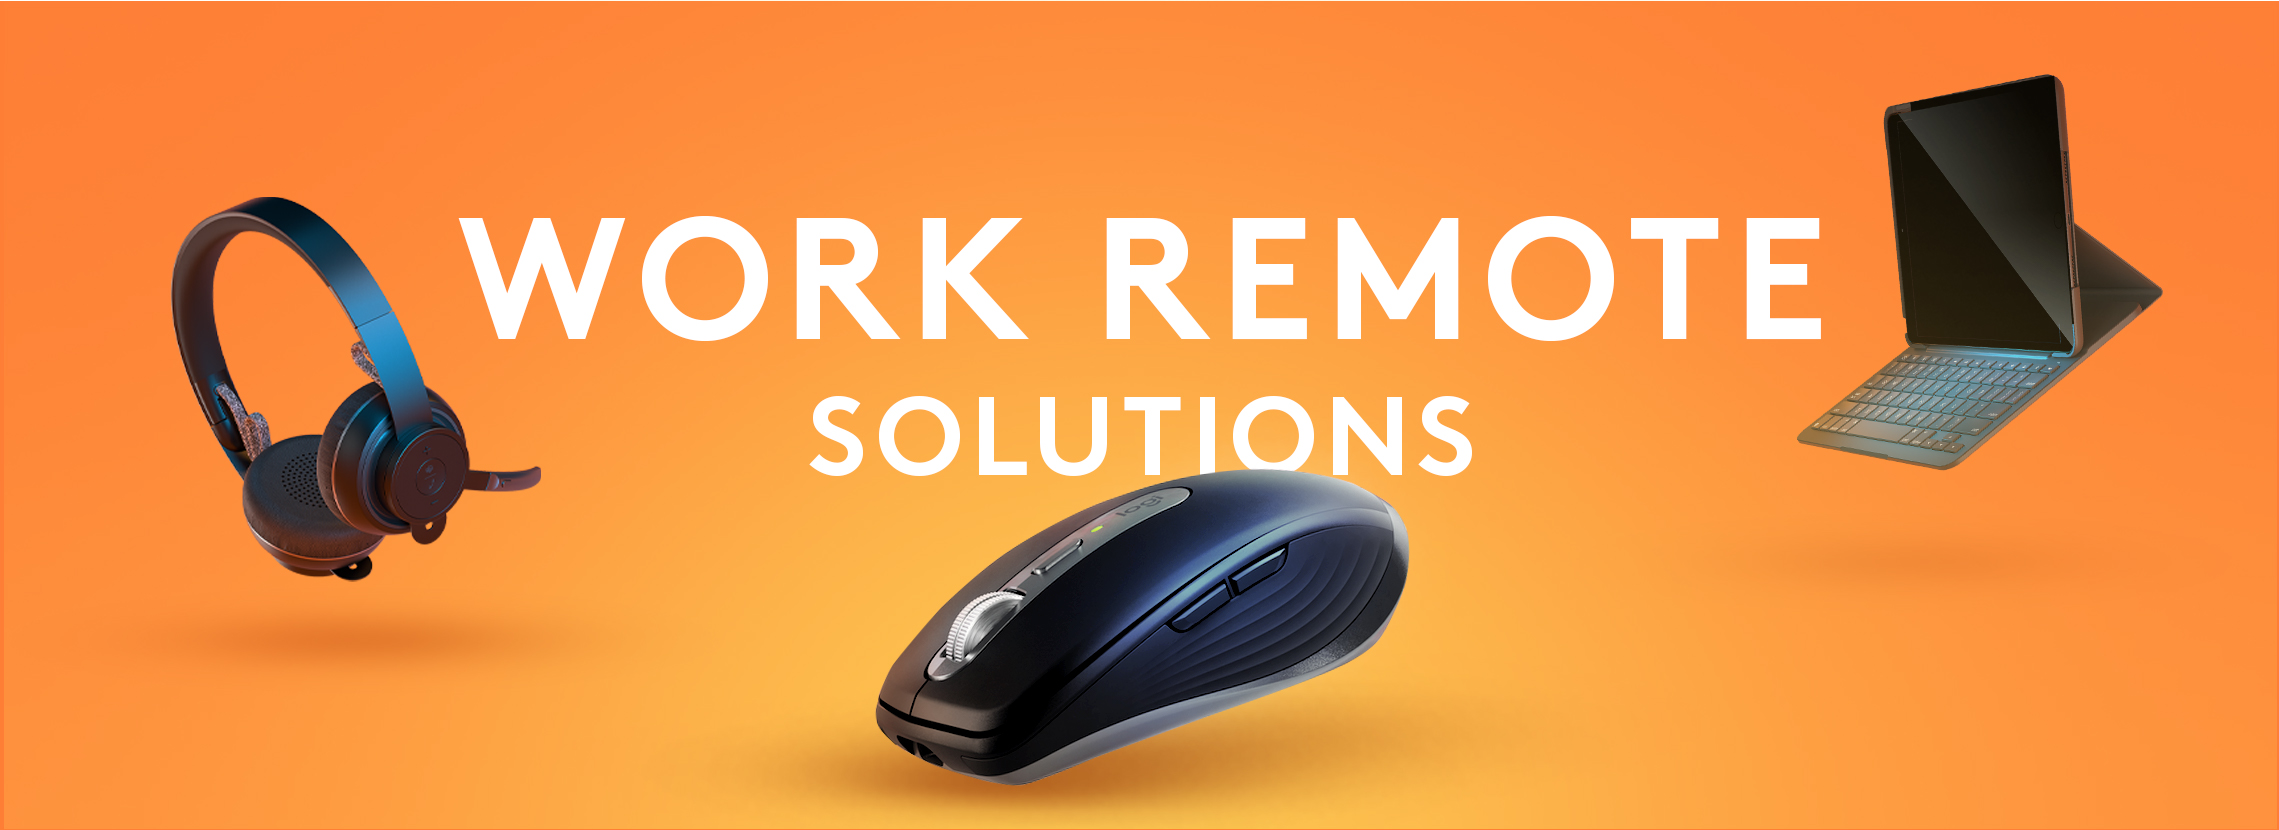 work remote solutions banner